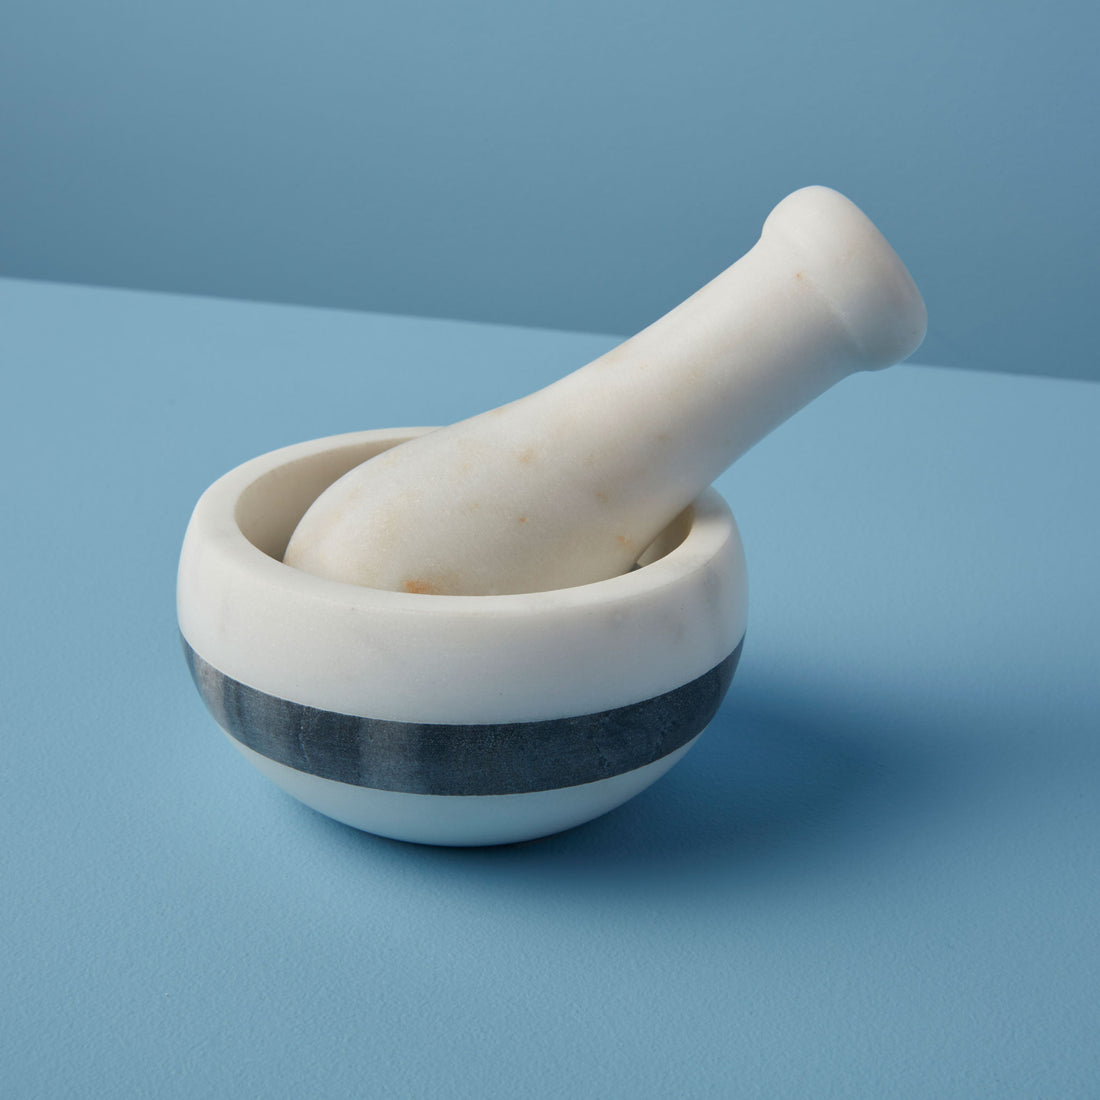 https://cdn.shopify.com/s/files/1/0376/0920/9900/products/Be-Home_White-and-Gray-Marble-Mortar-and-Pestle-with-Stripe_58-40.jpg?v=1606271947&width=1100